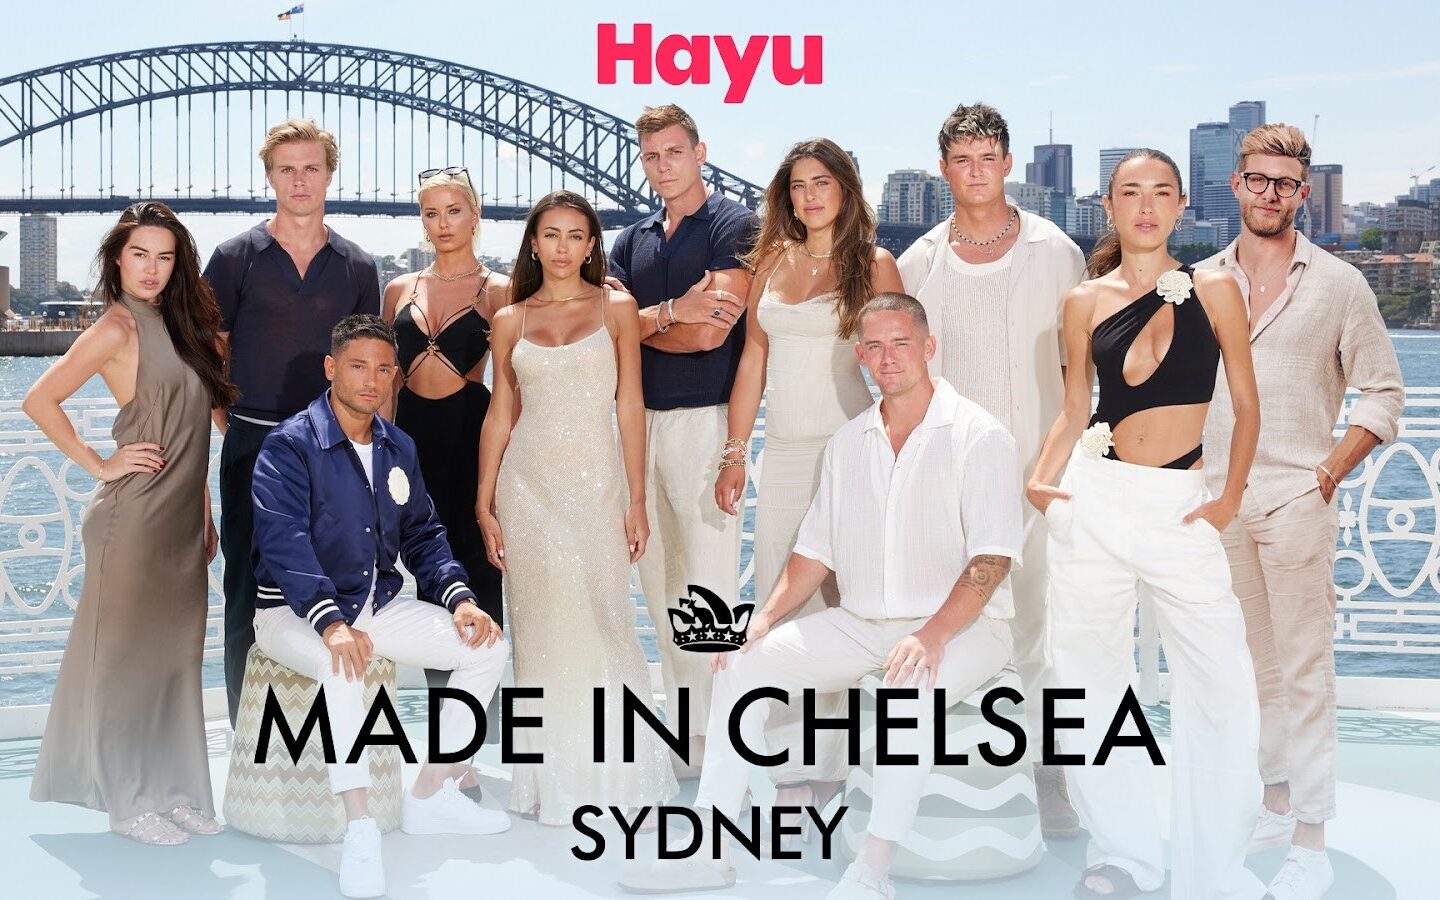 Made in Chelsea: Sydney on Hayu